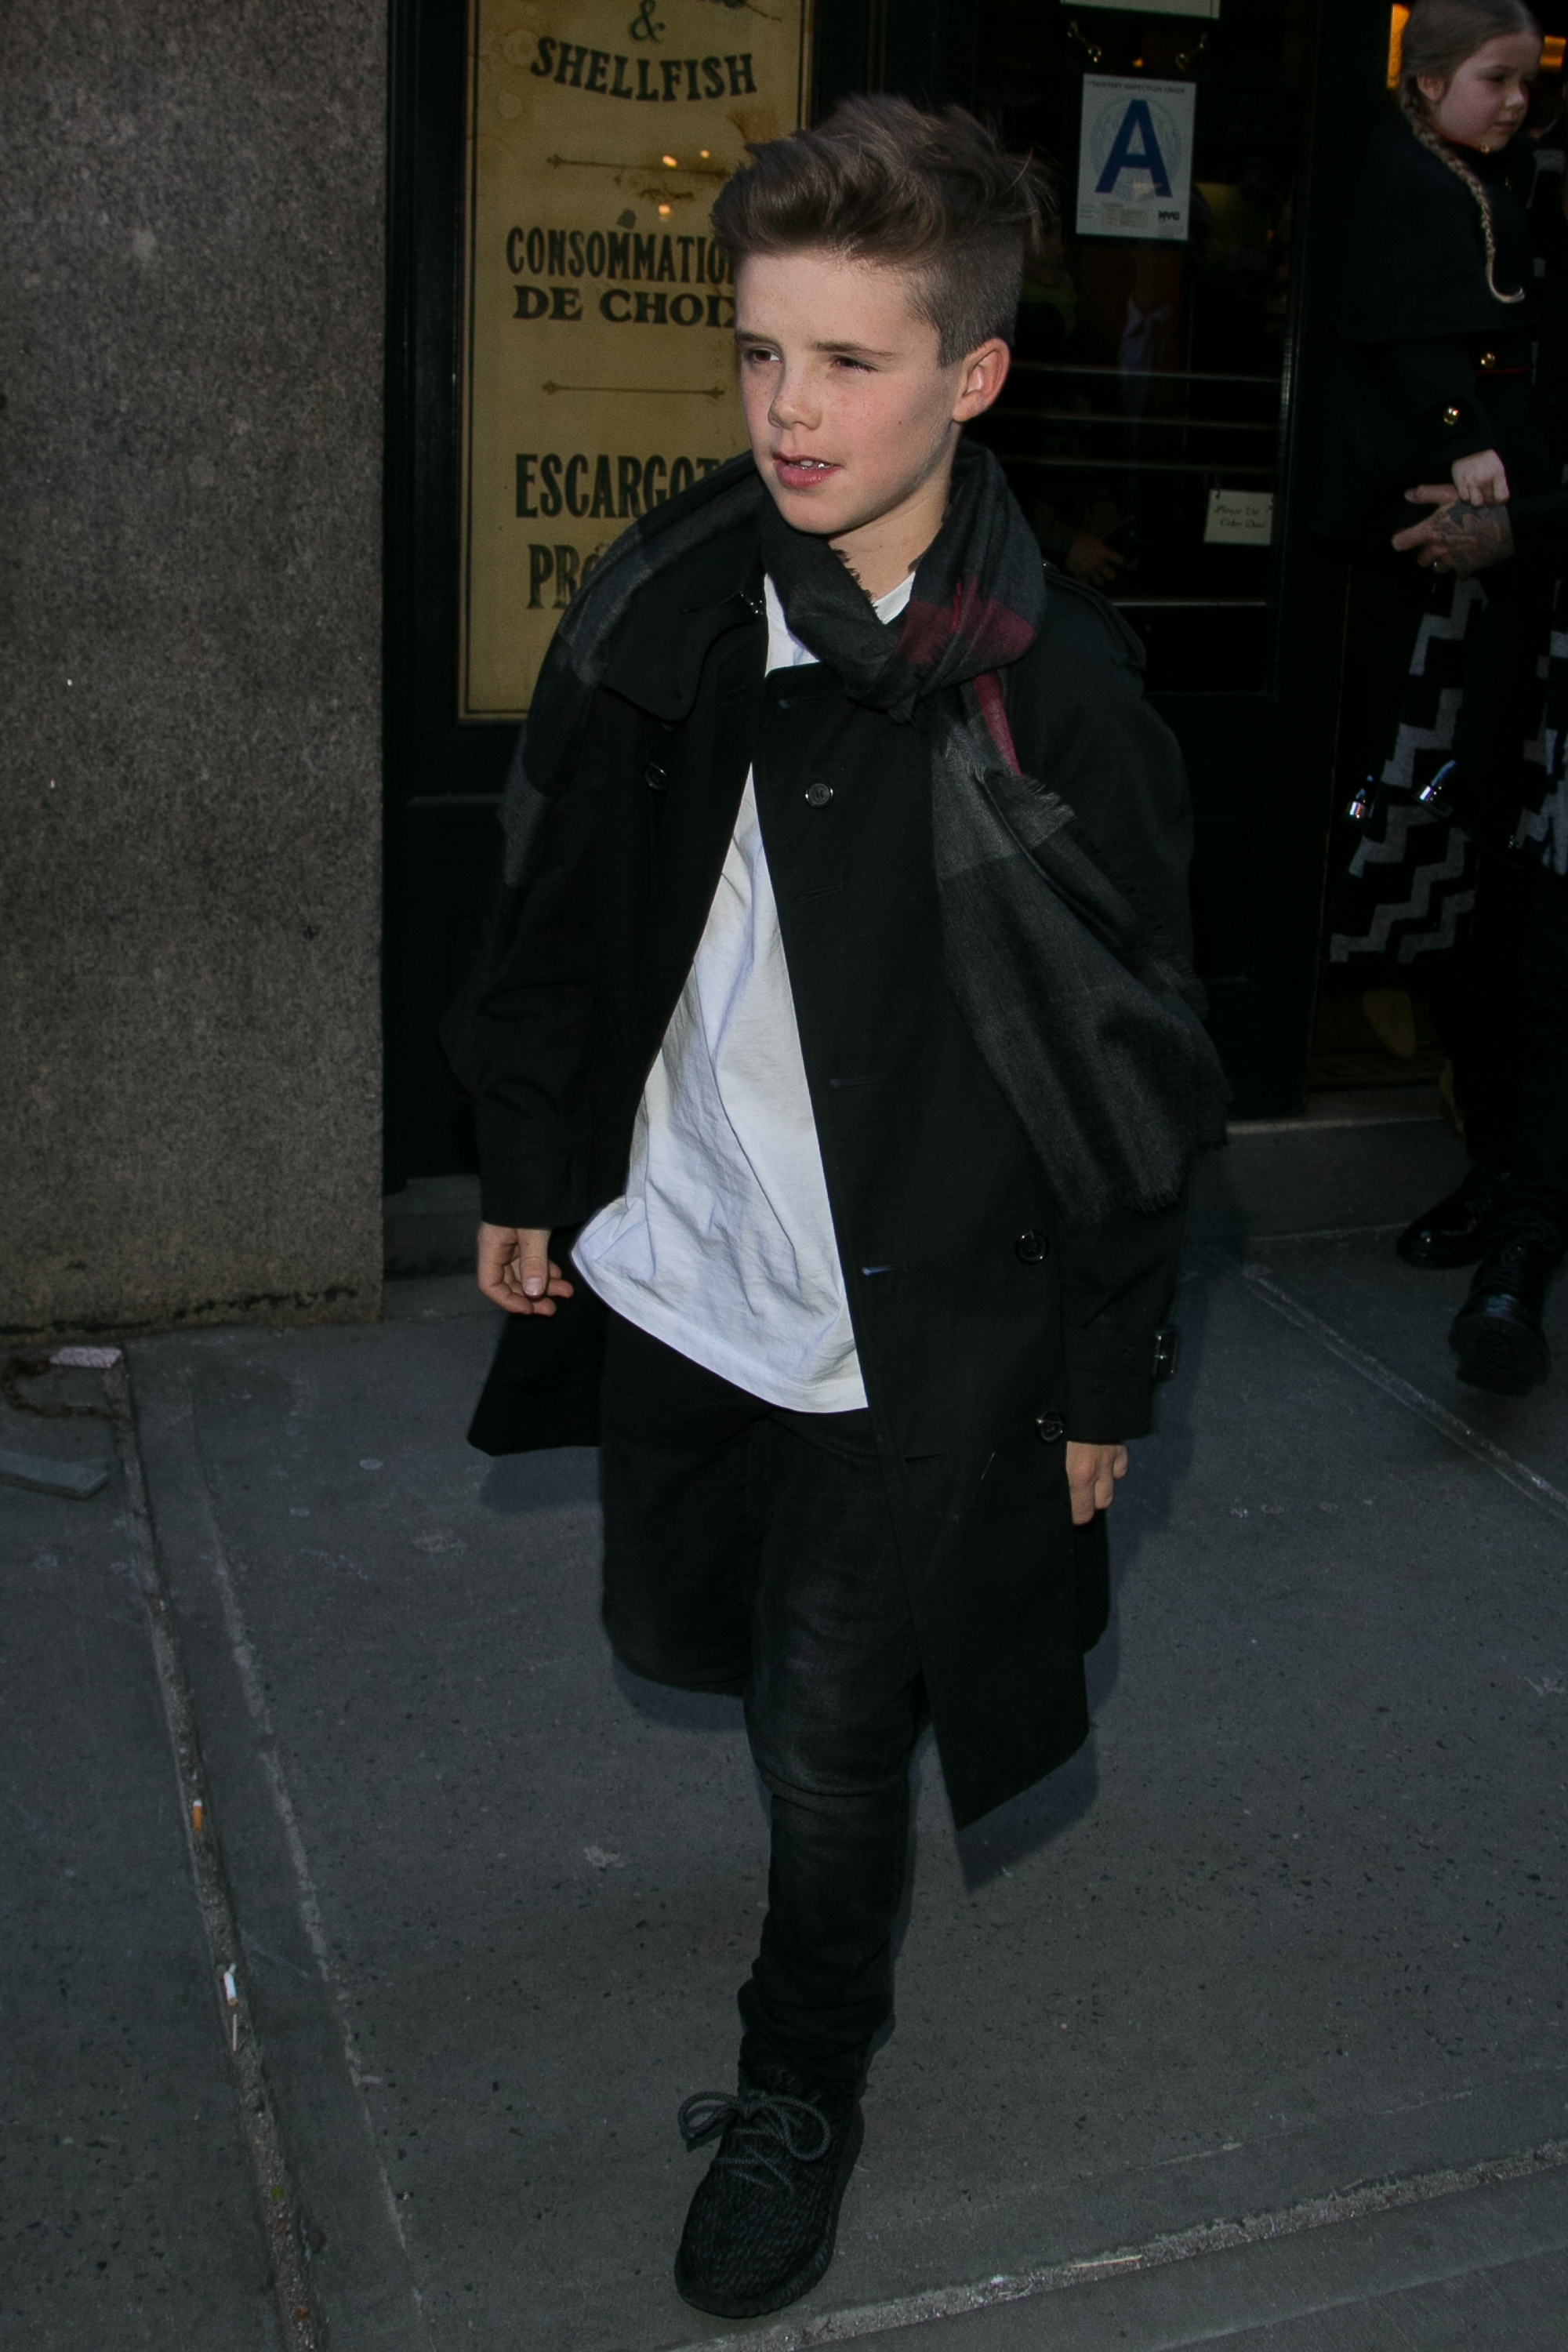 Cruz Beckham leaves the Balthazar restaurant in New York City on February 14, 2016 | Source: Getty Images